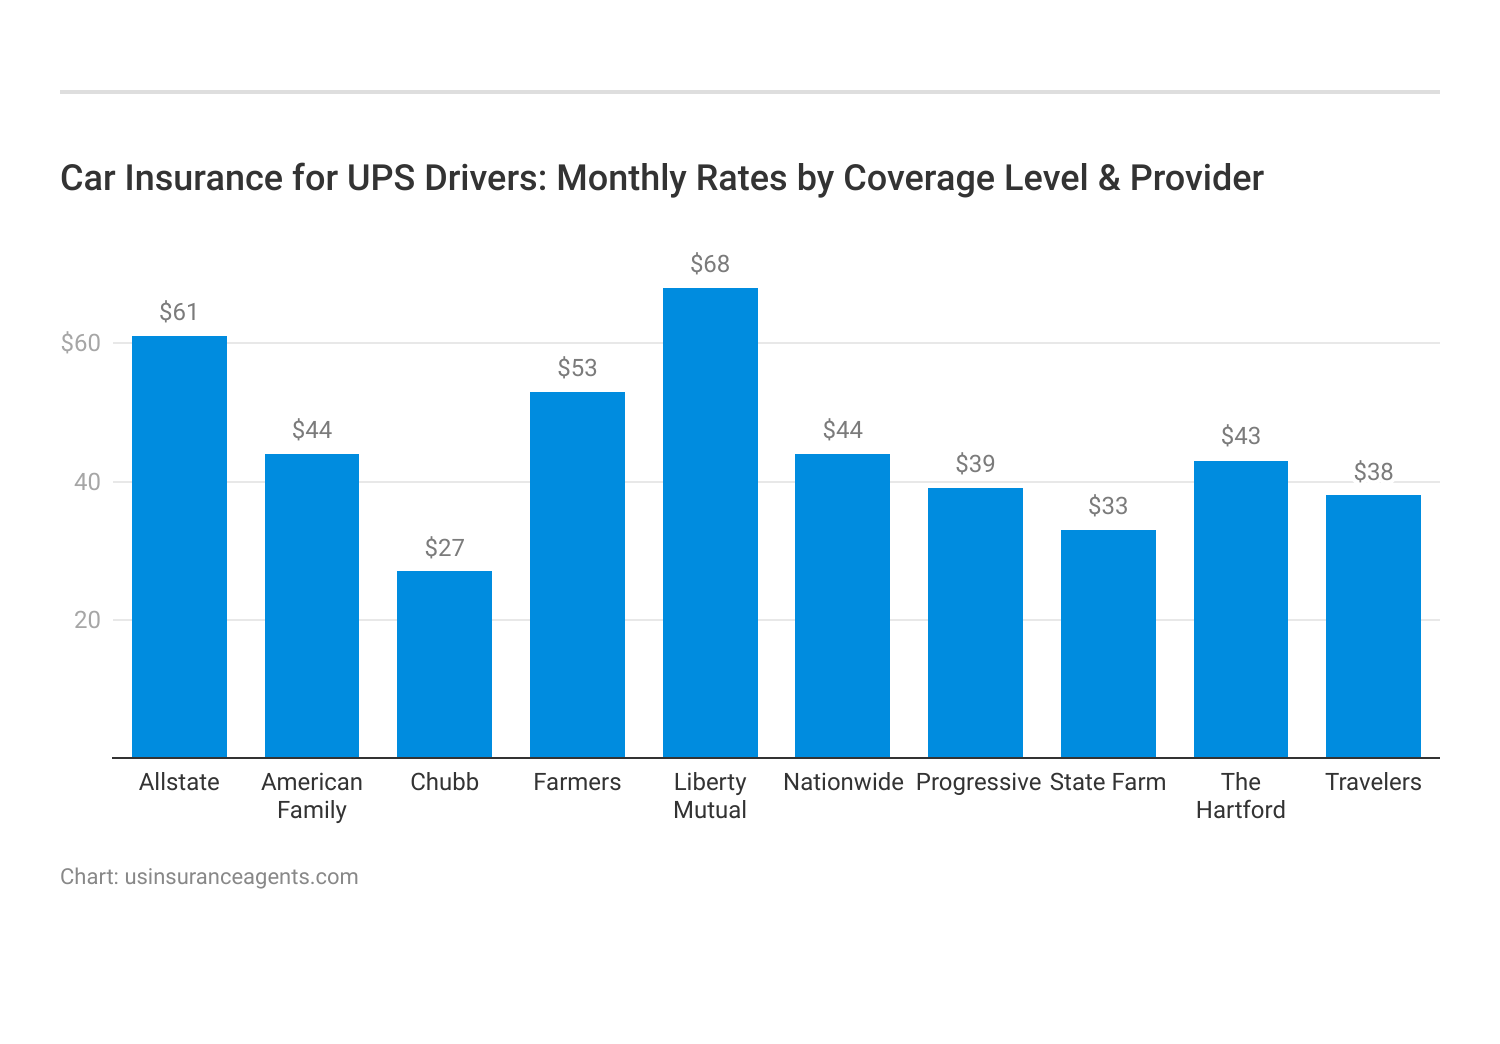 <h3>Car Insurance for UPS Drivers: Monthly Rates by Coverage Level & Provider</h3>